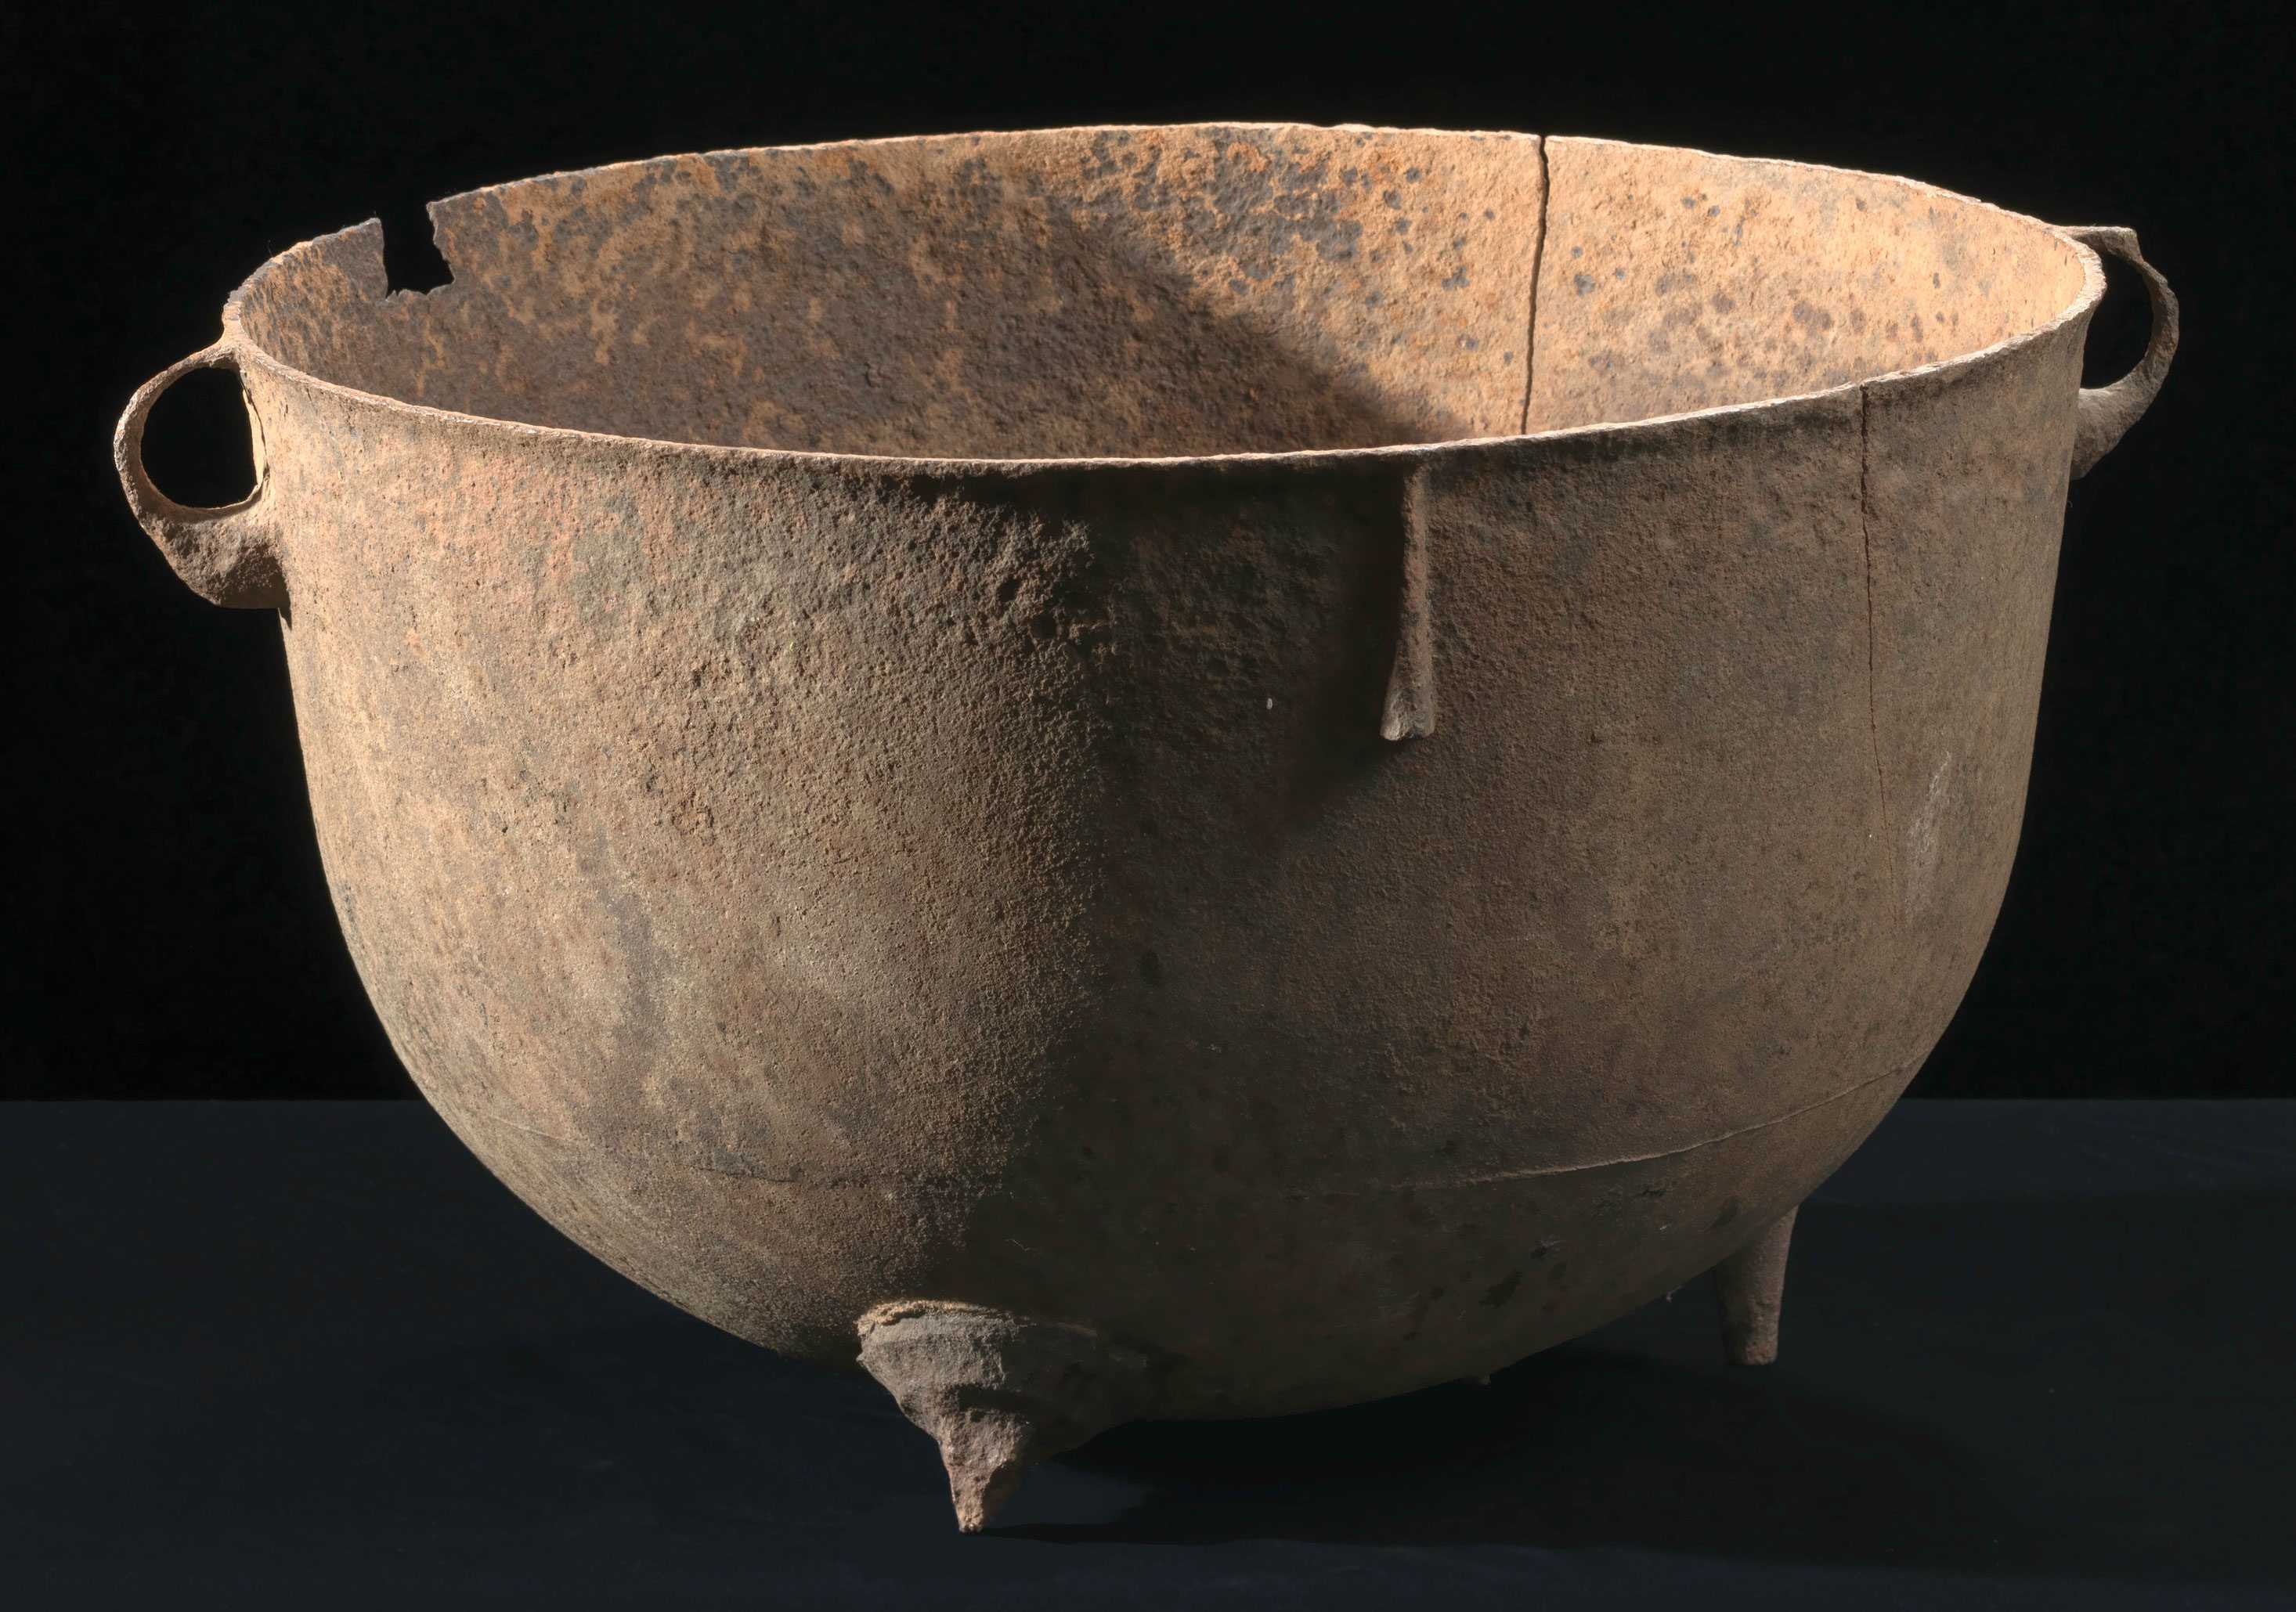 A large wash pot has small handles and small feet. It is worned from rust and dirt and cracked.